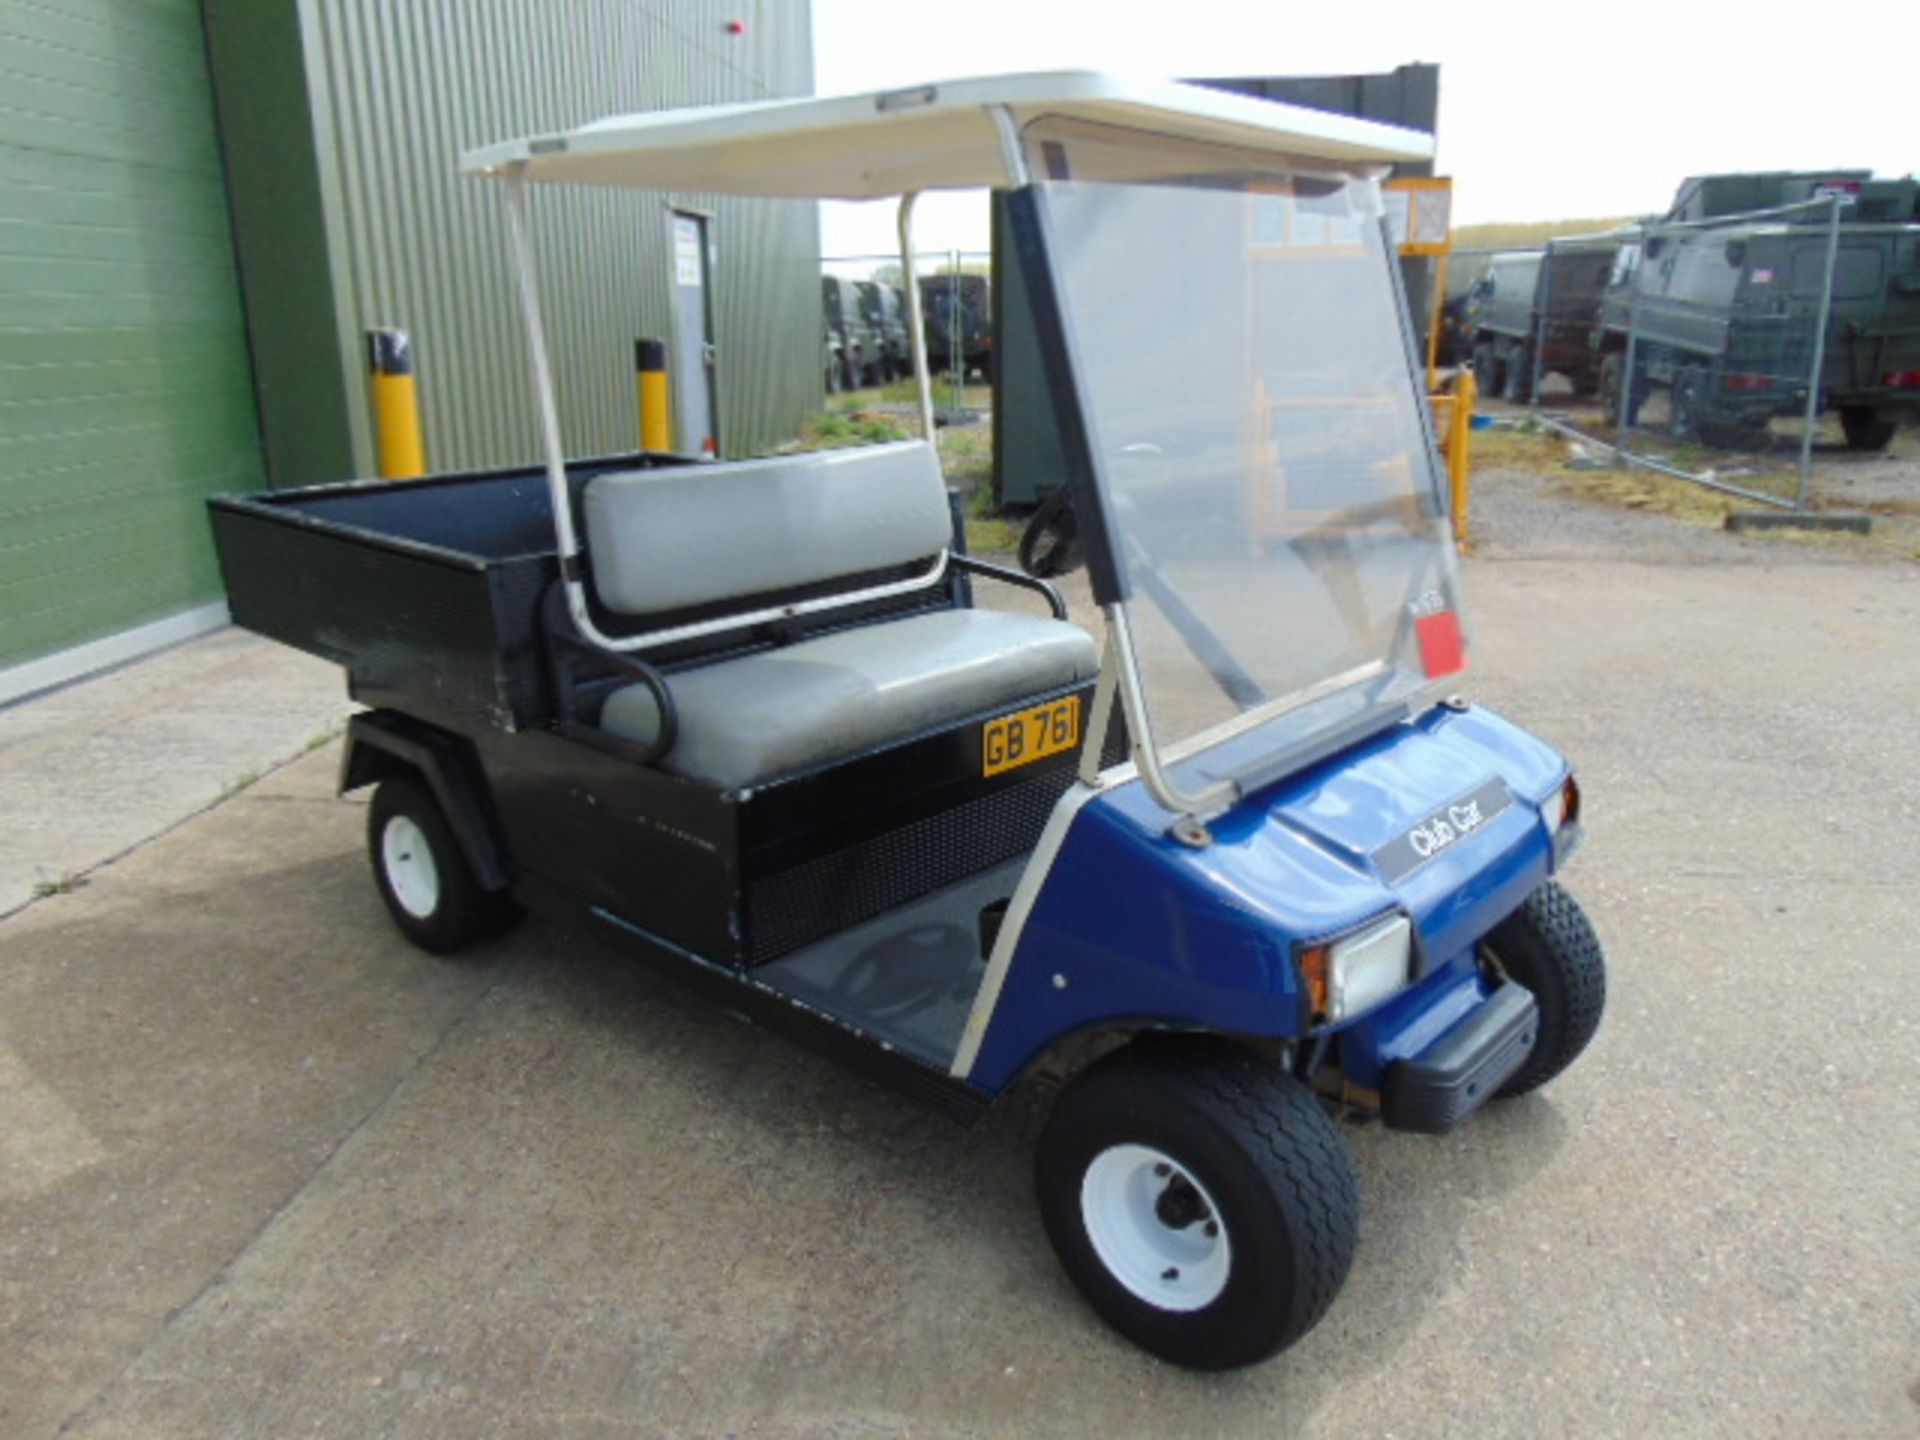 Club Car 2 Seater Golf Buggy / Estate Vehicle C/W Tipping Rear Body - Image 3 of 13